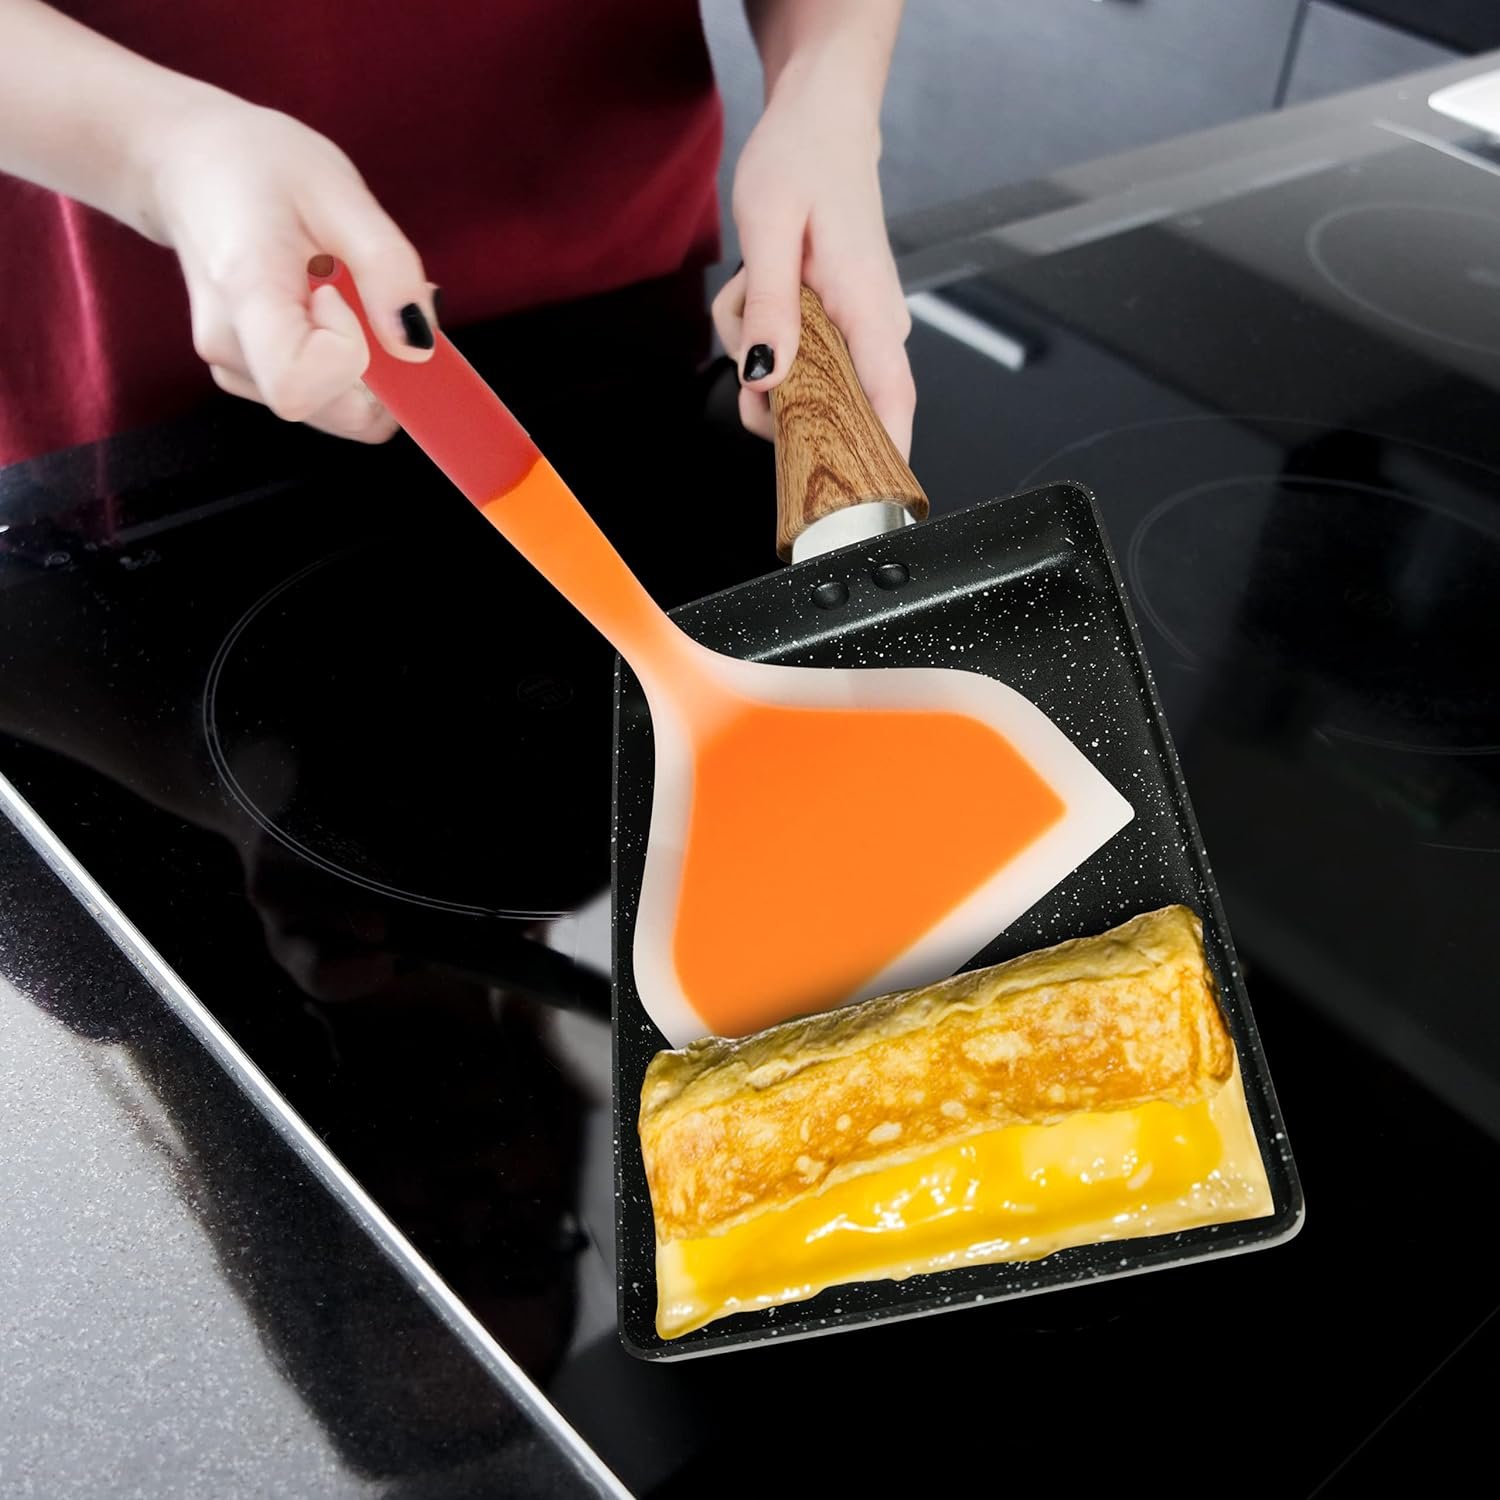 Tamagoyaki Pan, Japanese Cookware, Egg Pan, Rectangle Frying Pan, Kitchen Accessories, Square Pan, Omelette Maker Nonstick, Omelet Pan, Cooking Tools, 7 x 5 Black